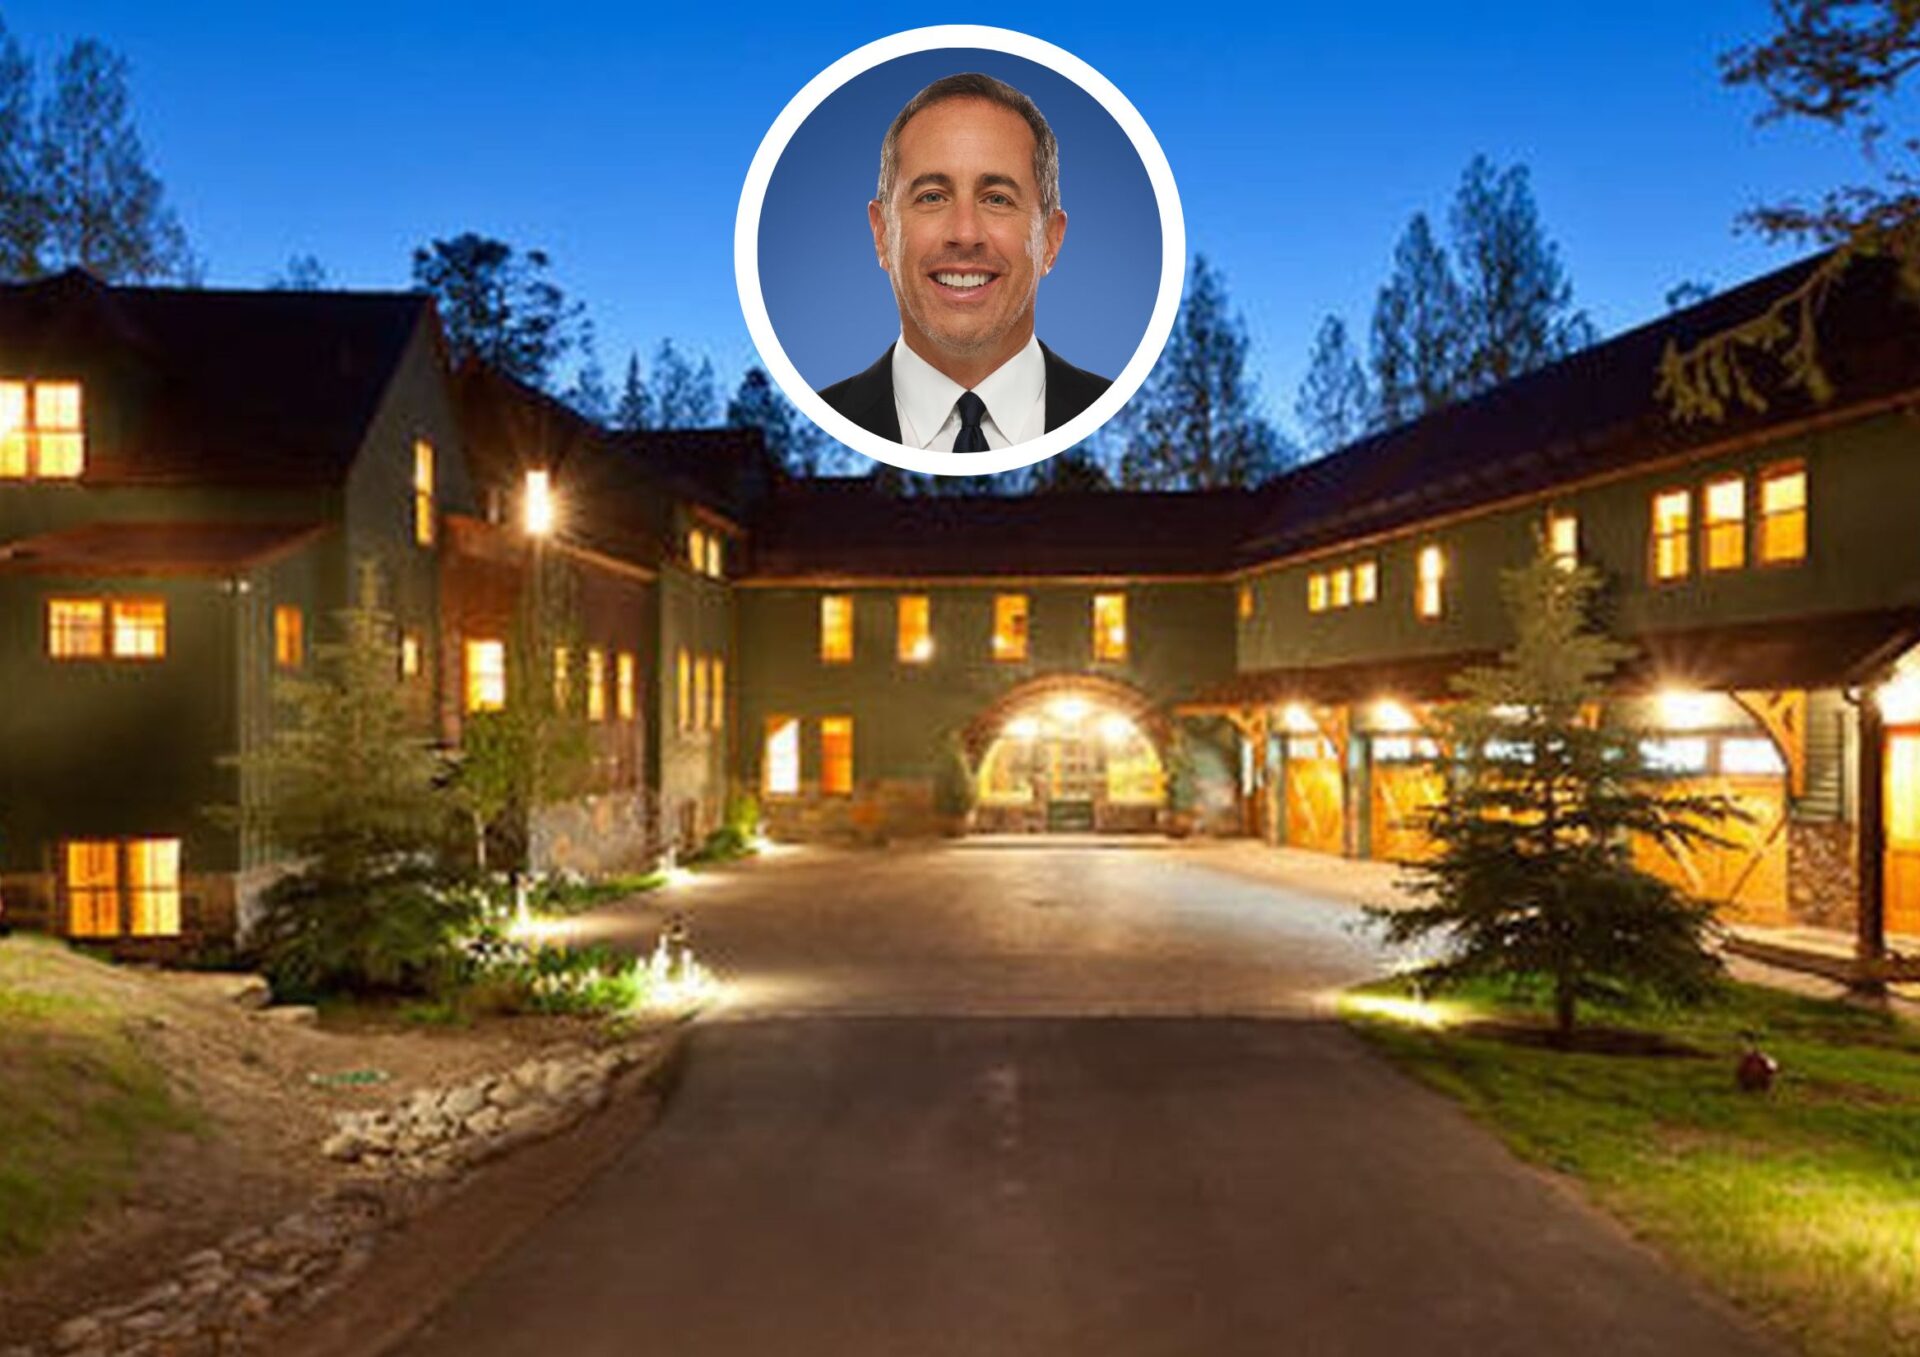 Main Image of Jerry Seinfeld's Estate